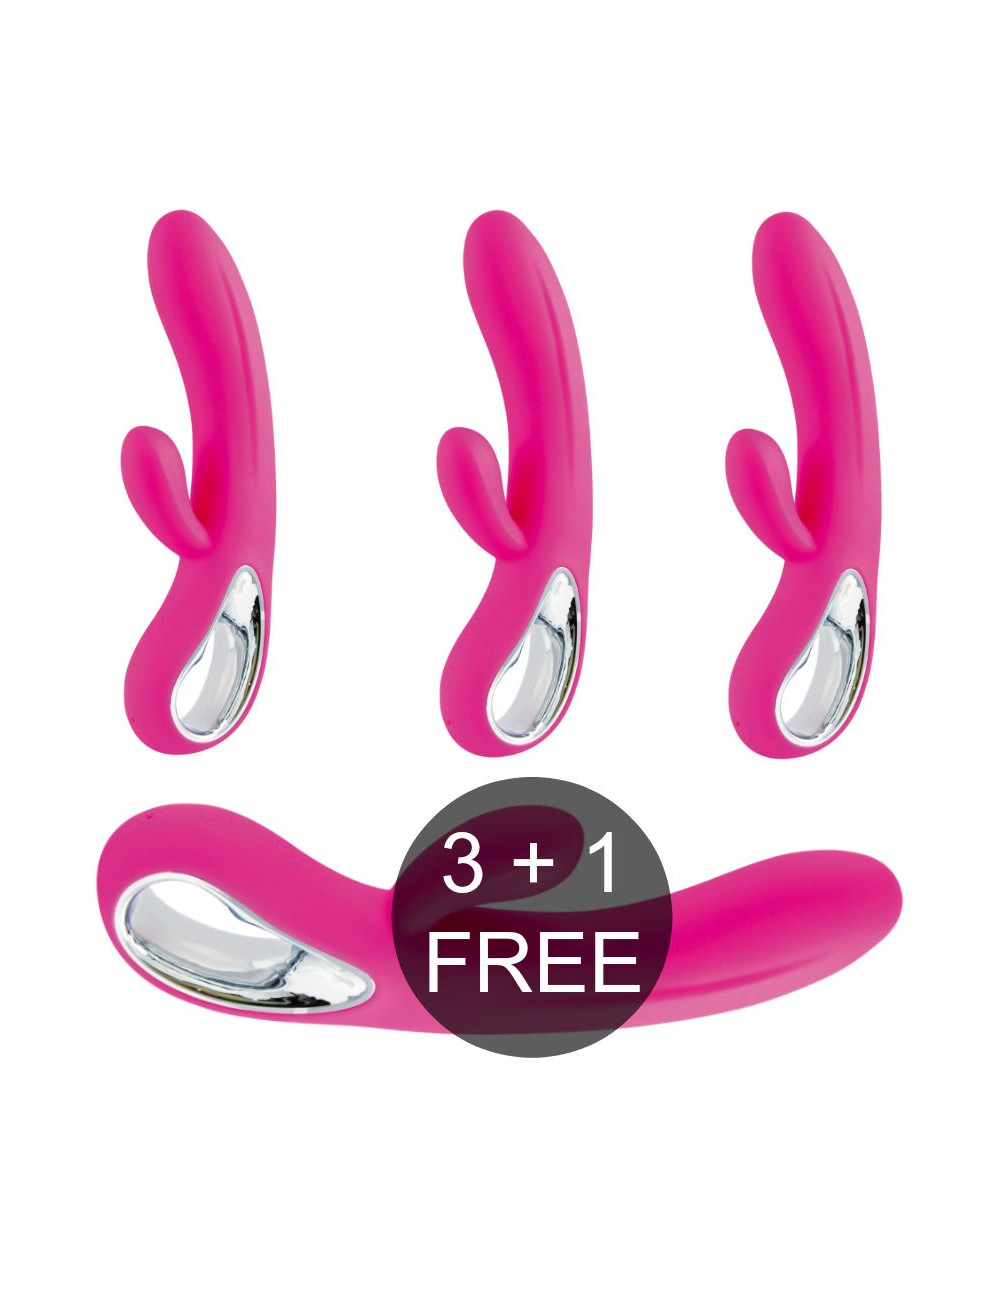 AMORESSA TROY PREMIUM SILICONE RECHARGEABLE 3 + 1 FREE